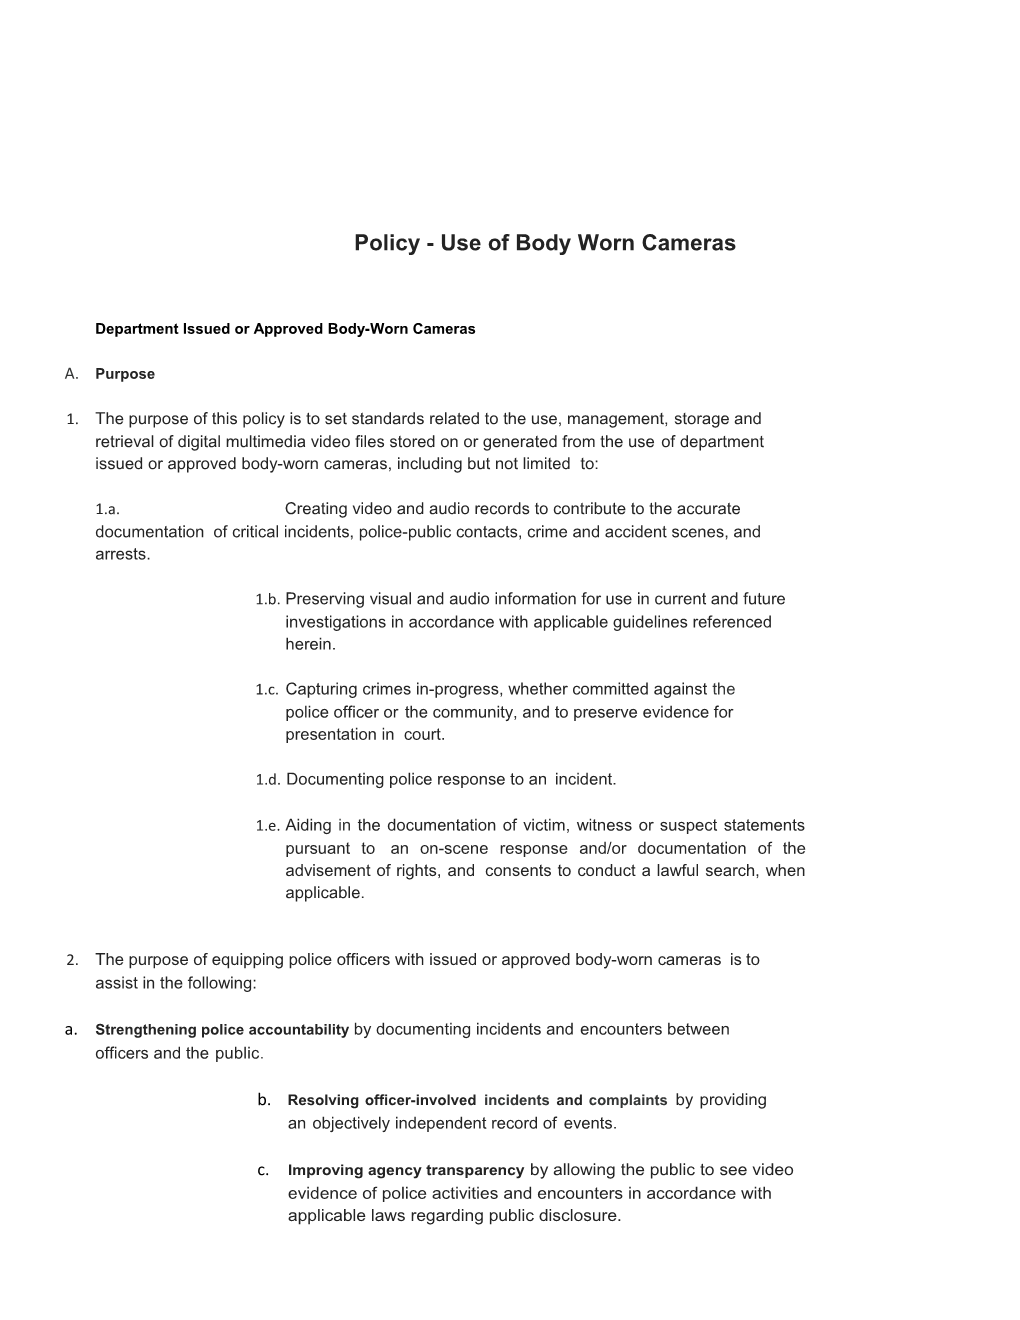 Policy - Use of Body Worn Cameras